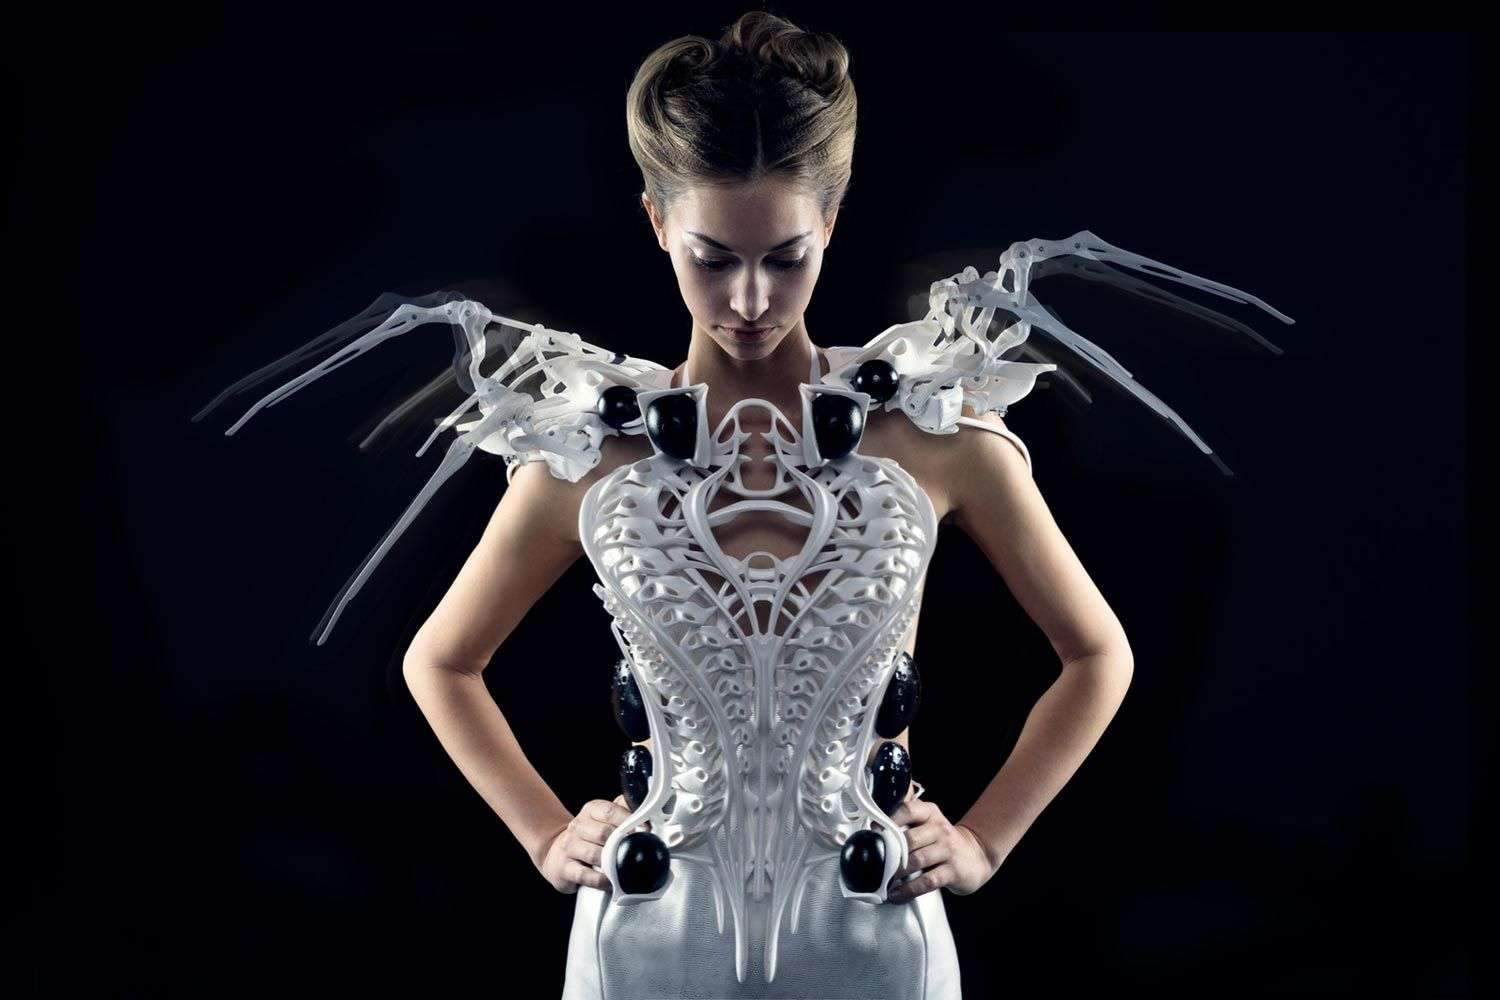 3D Printed Interactive Wearable Designs by Anouk Wipprecht